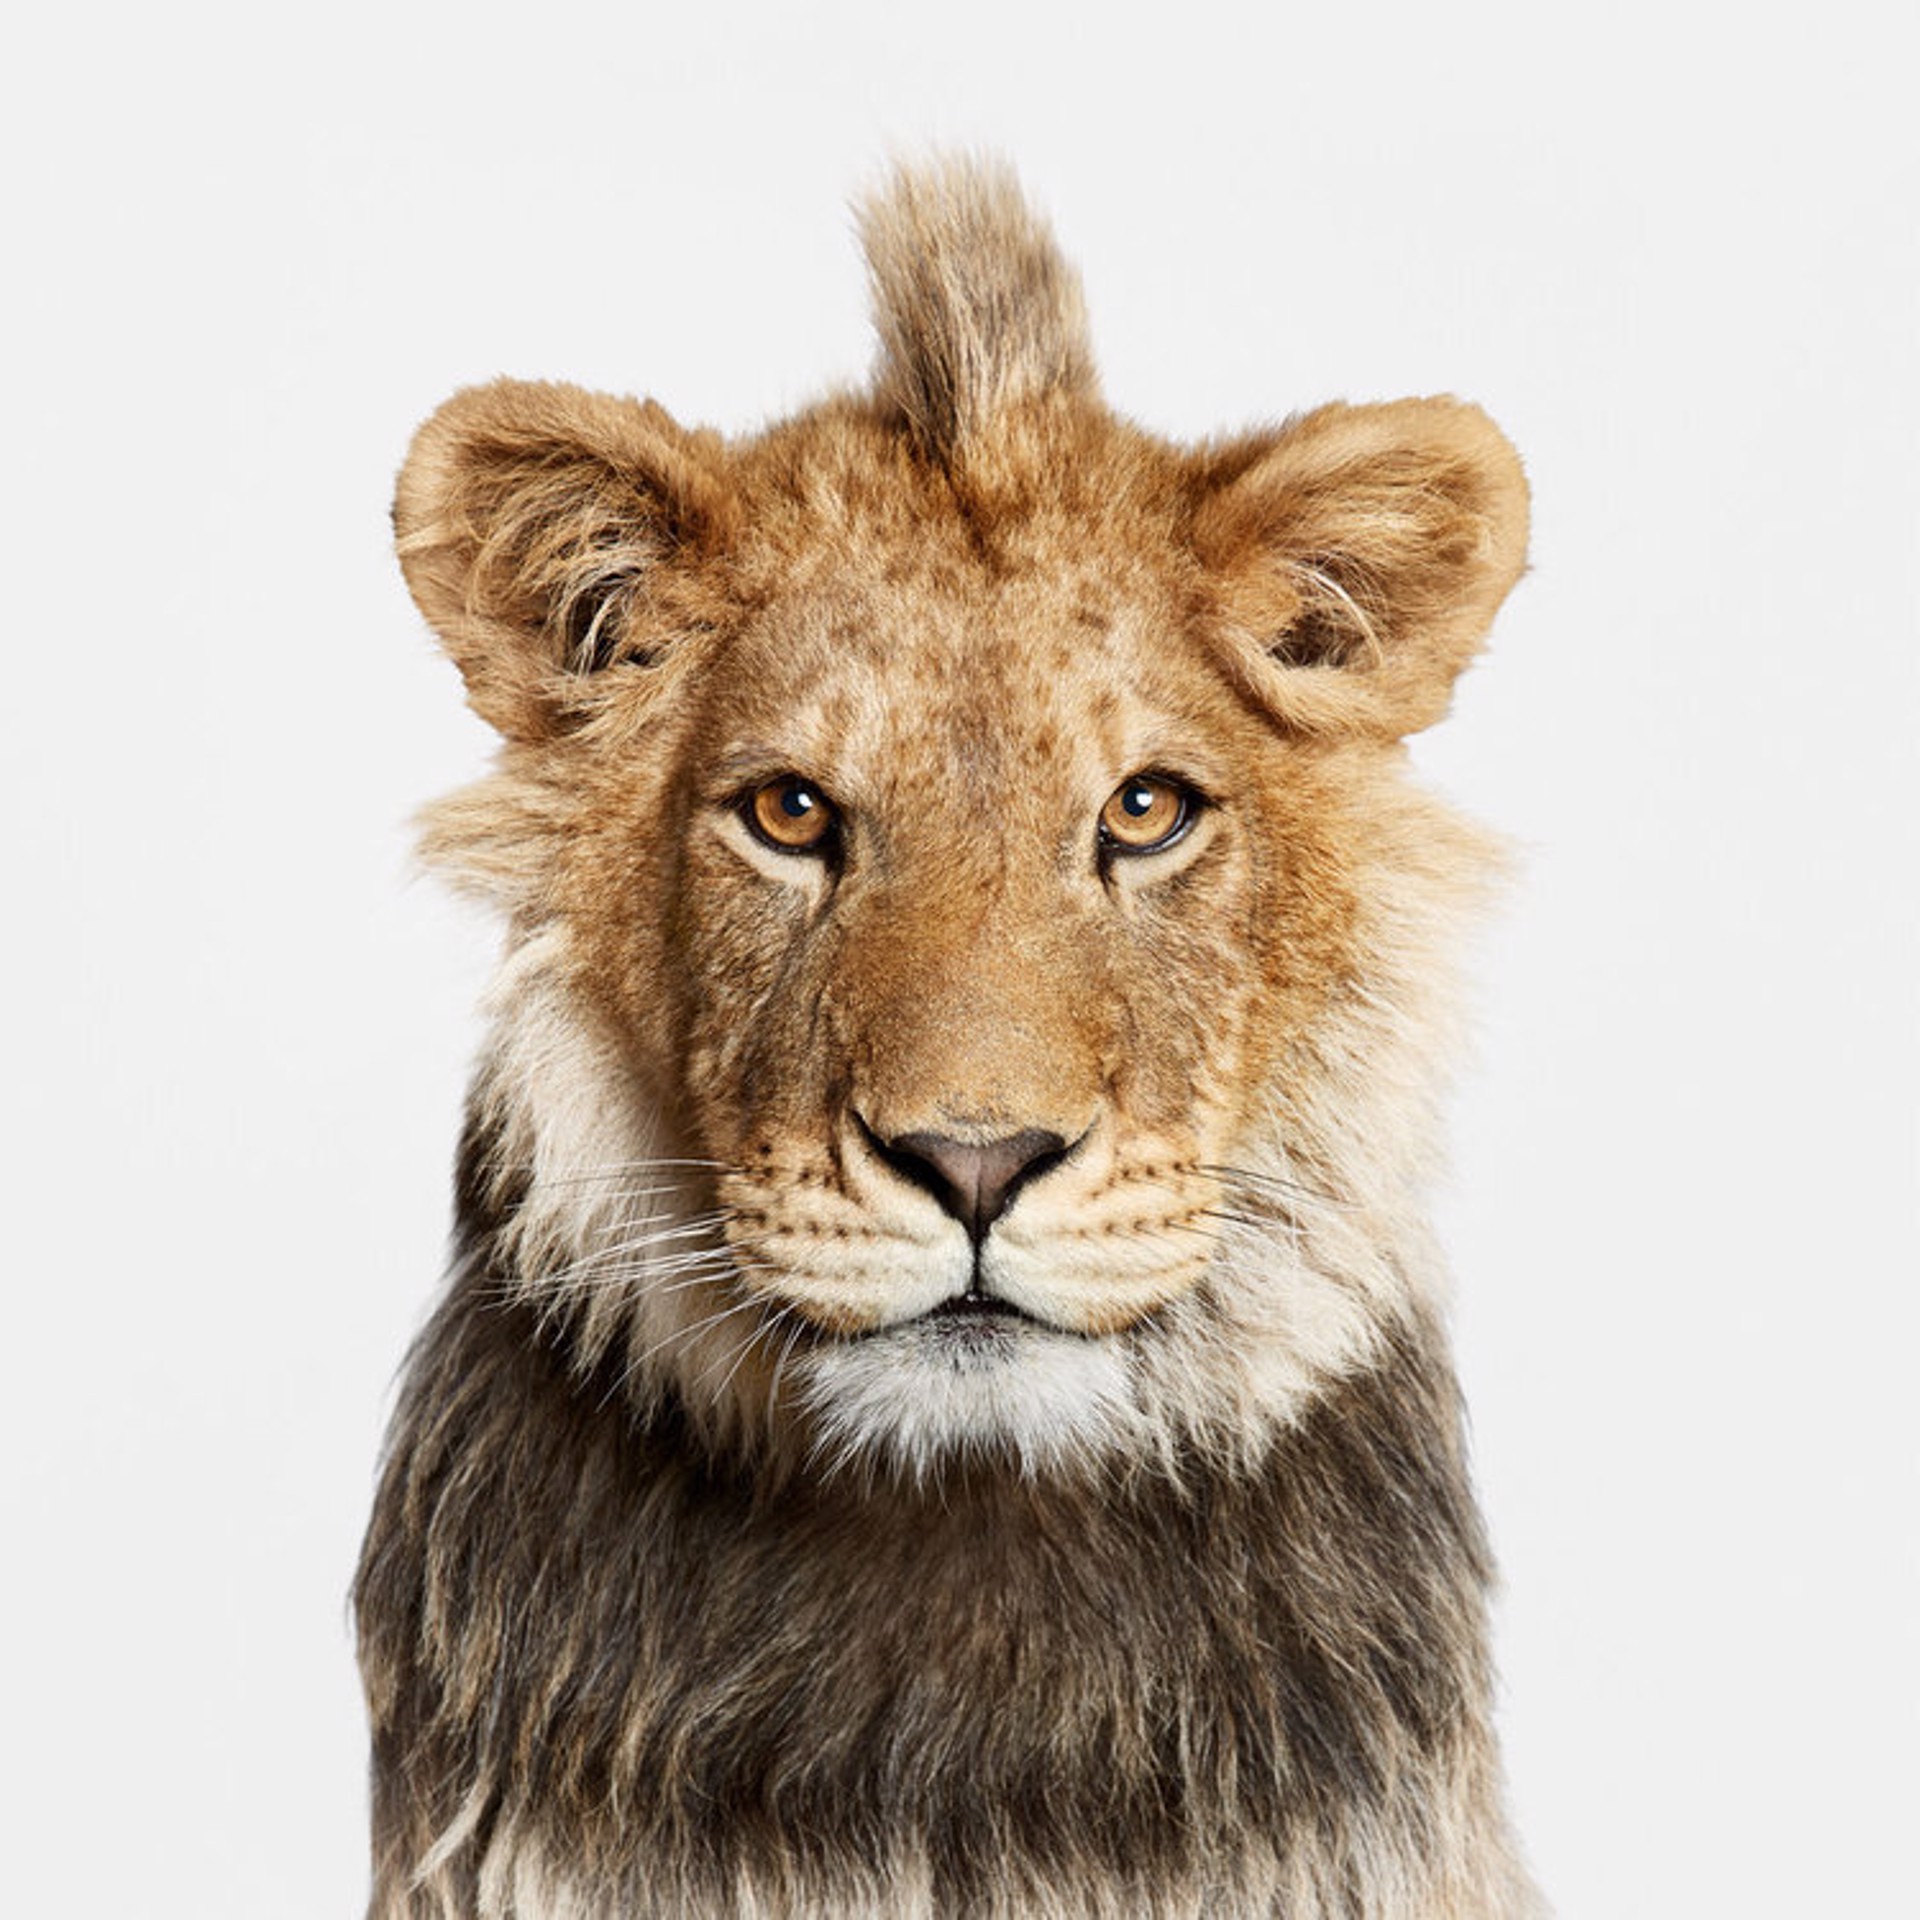 Young Lion by Randal Ford